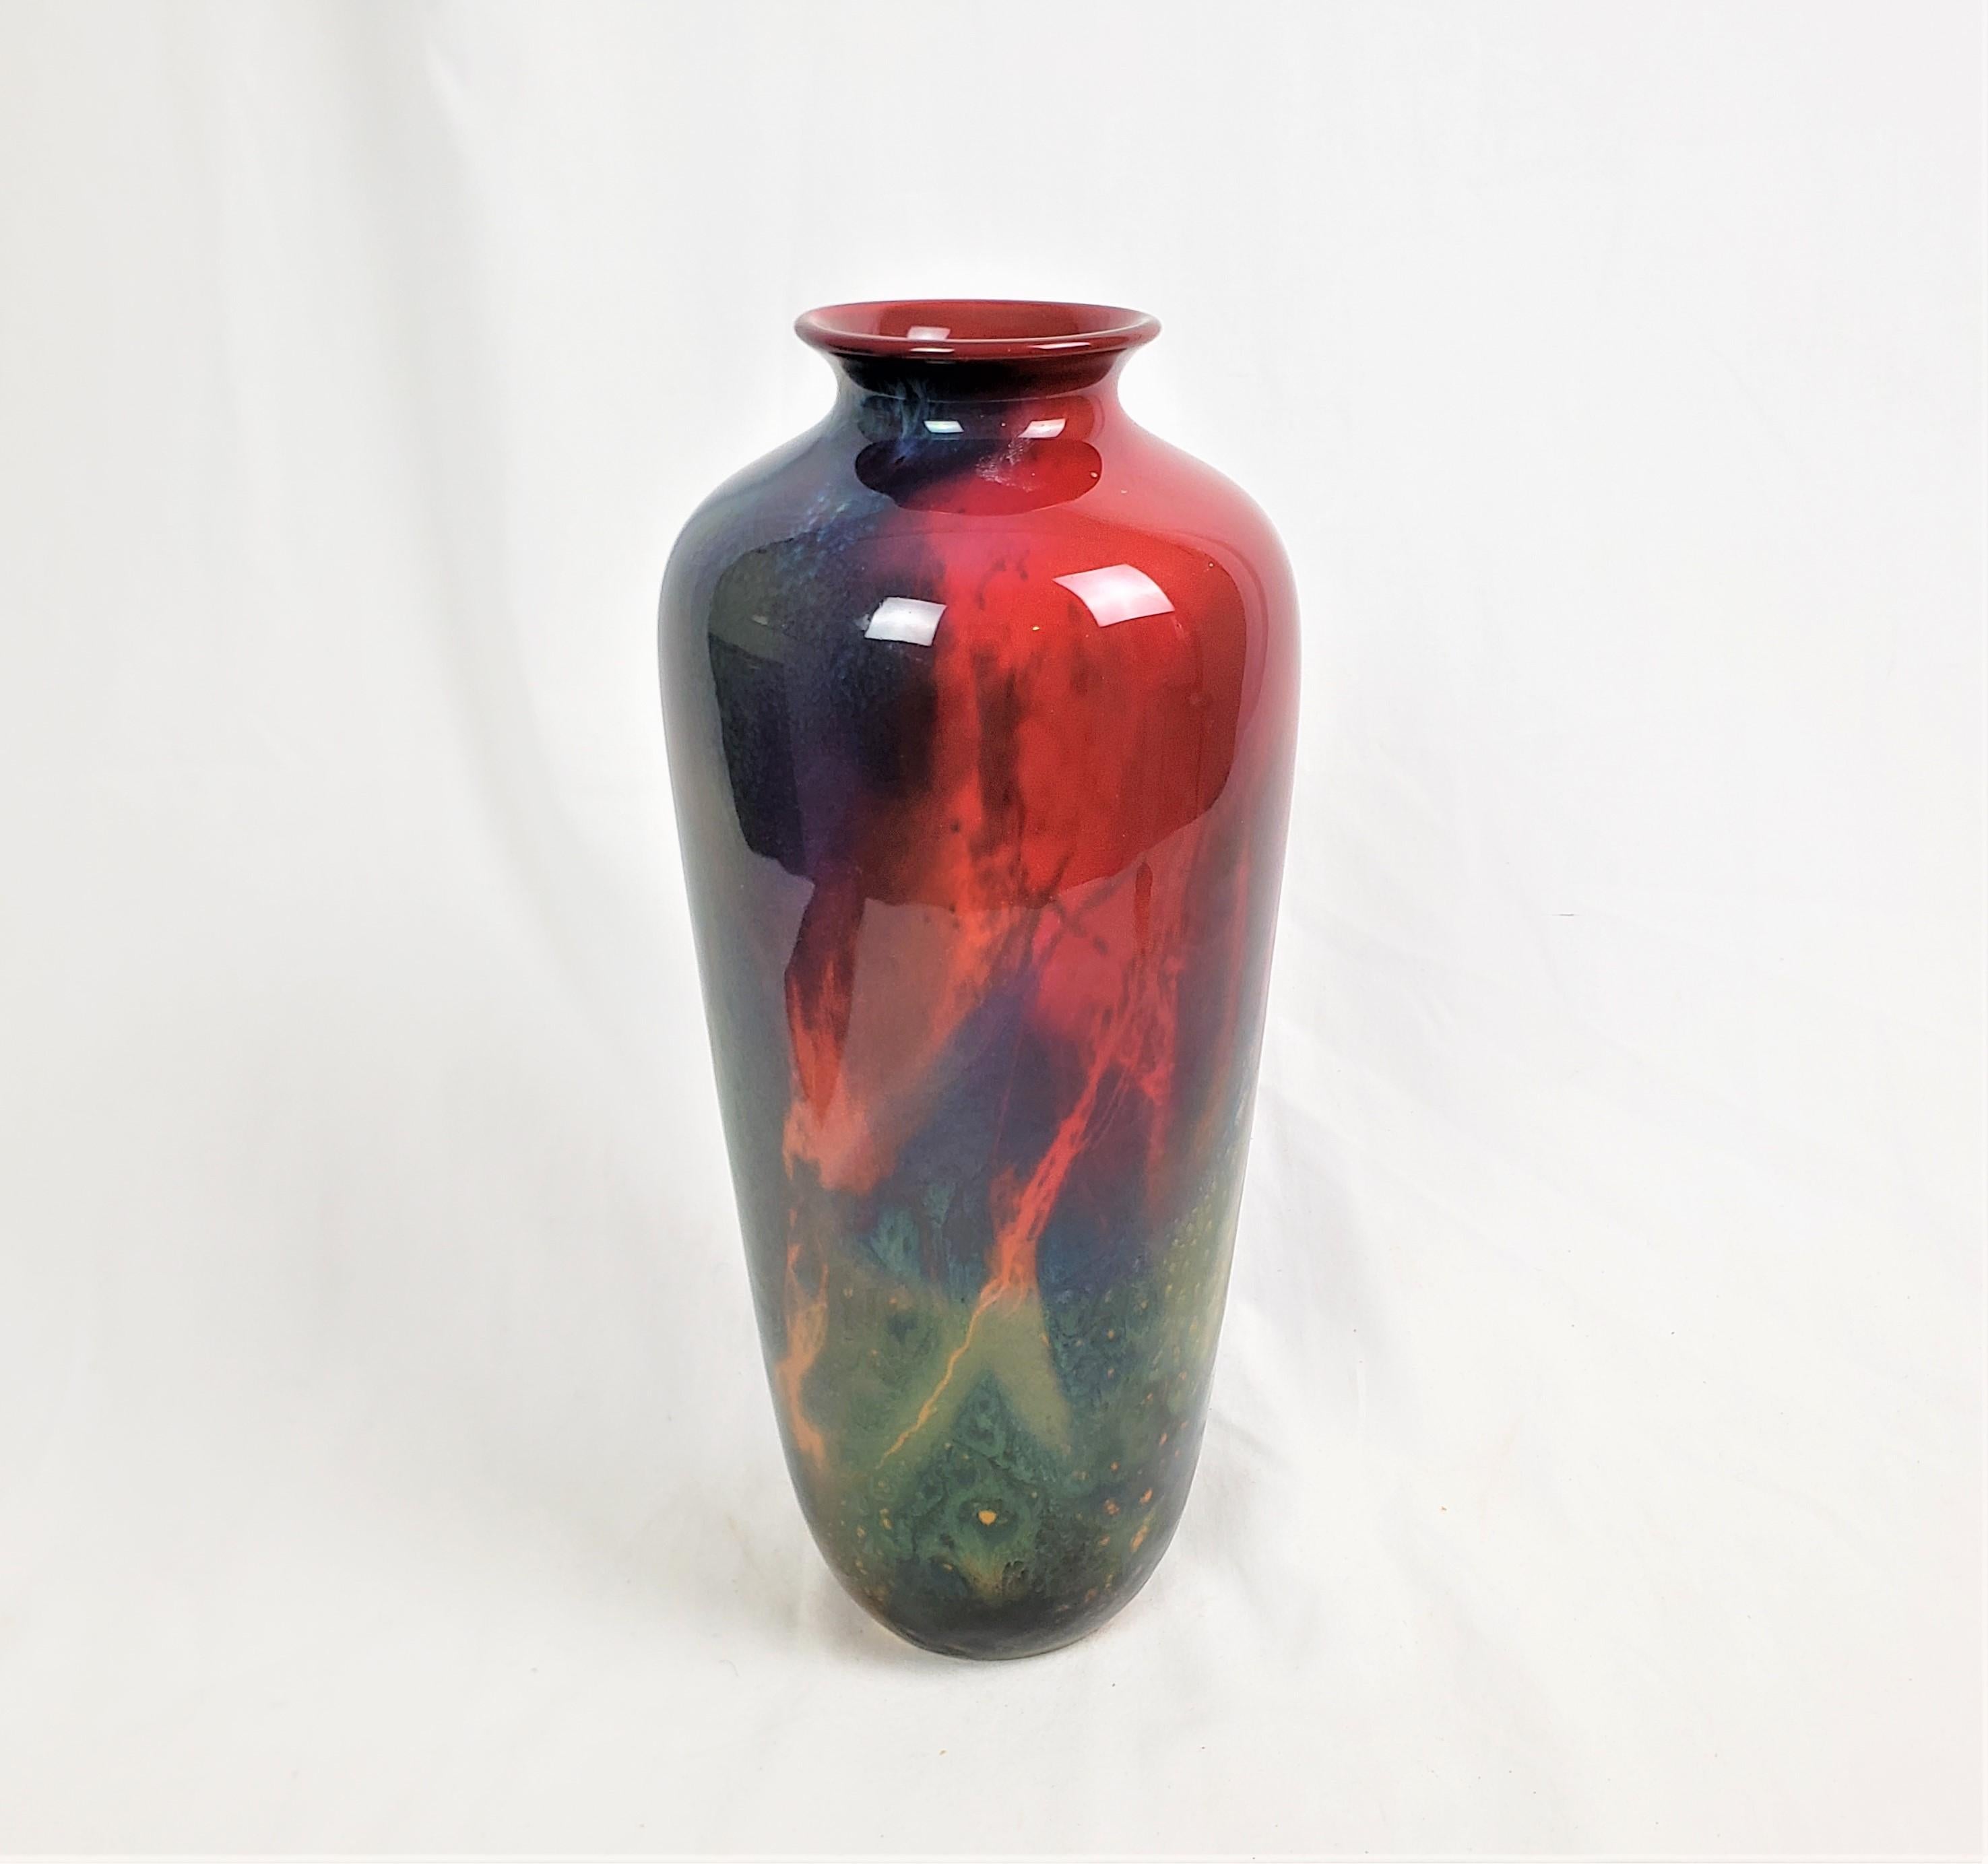 This antique vase was made by the well known Royal Doulton factory of England in approximately 1920 in their period Art Deco style. This tall vase was designed and crafted by artist Noke Sung using their signature and newly developed flambe glaze.